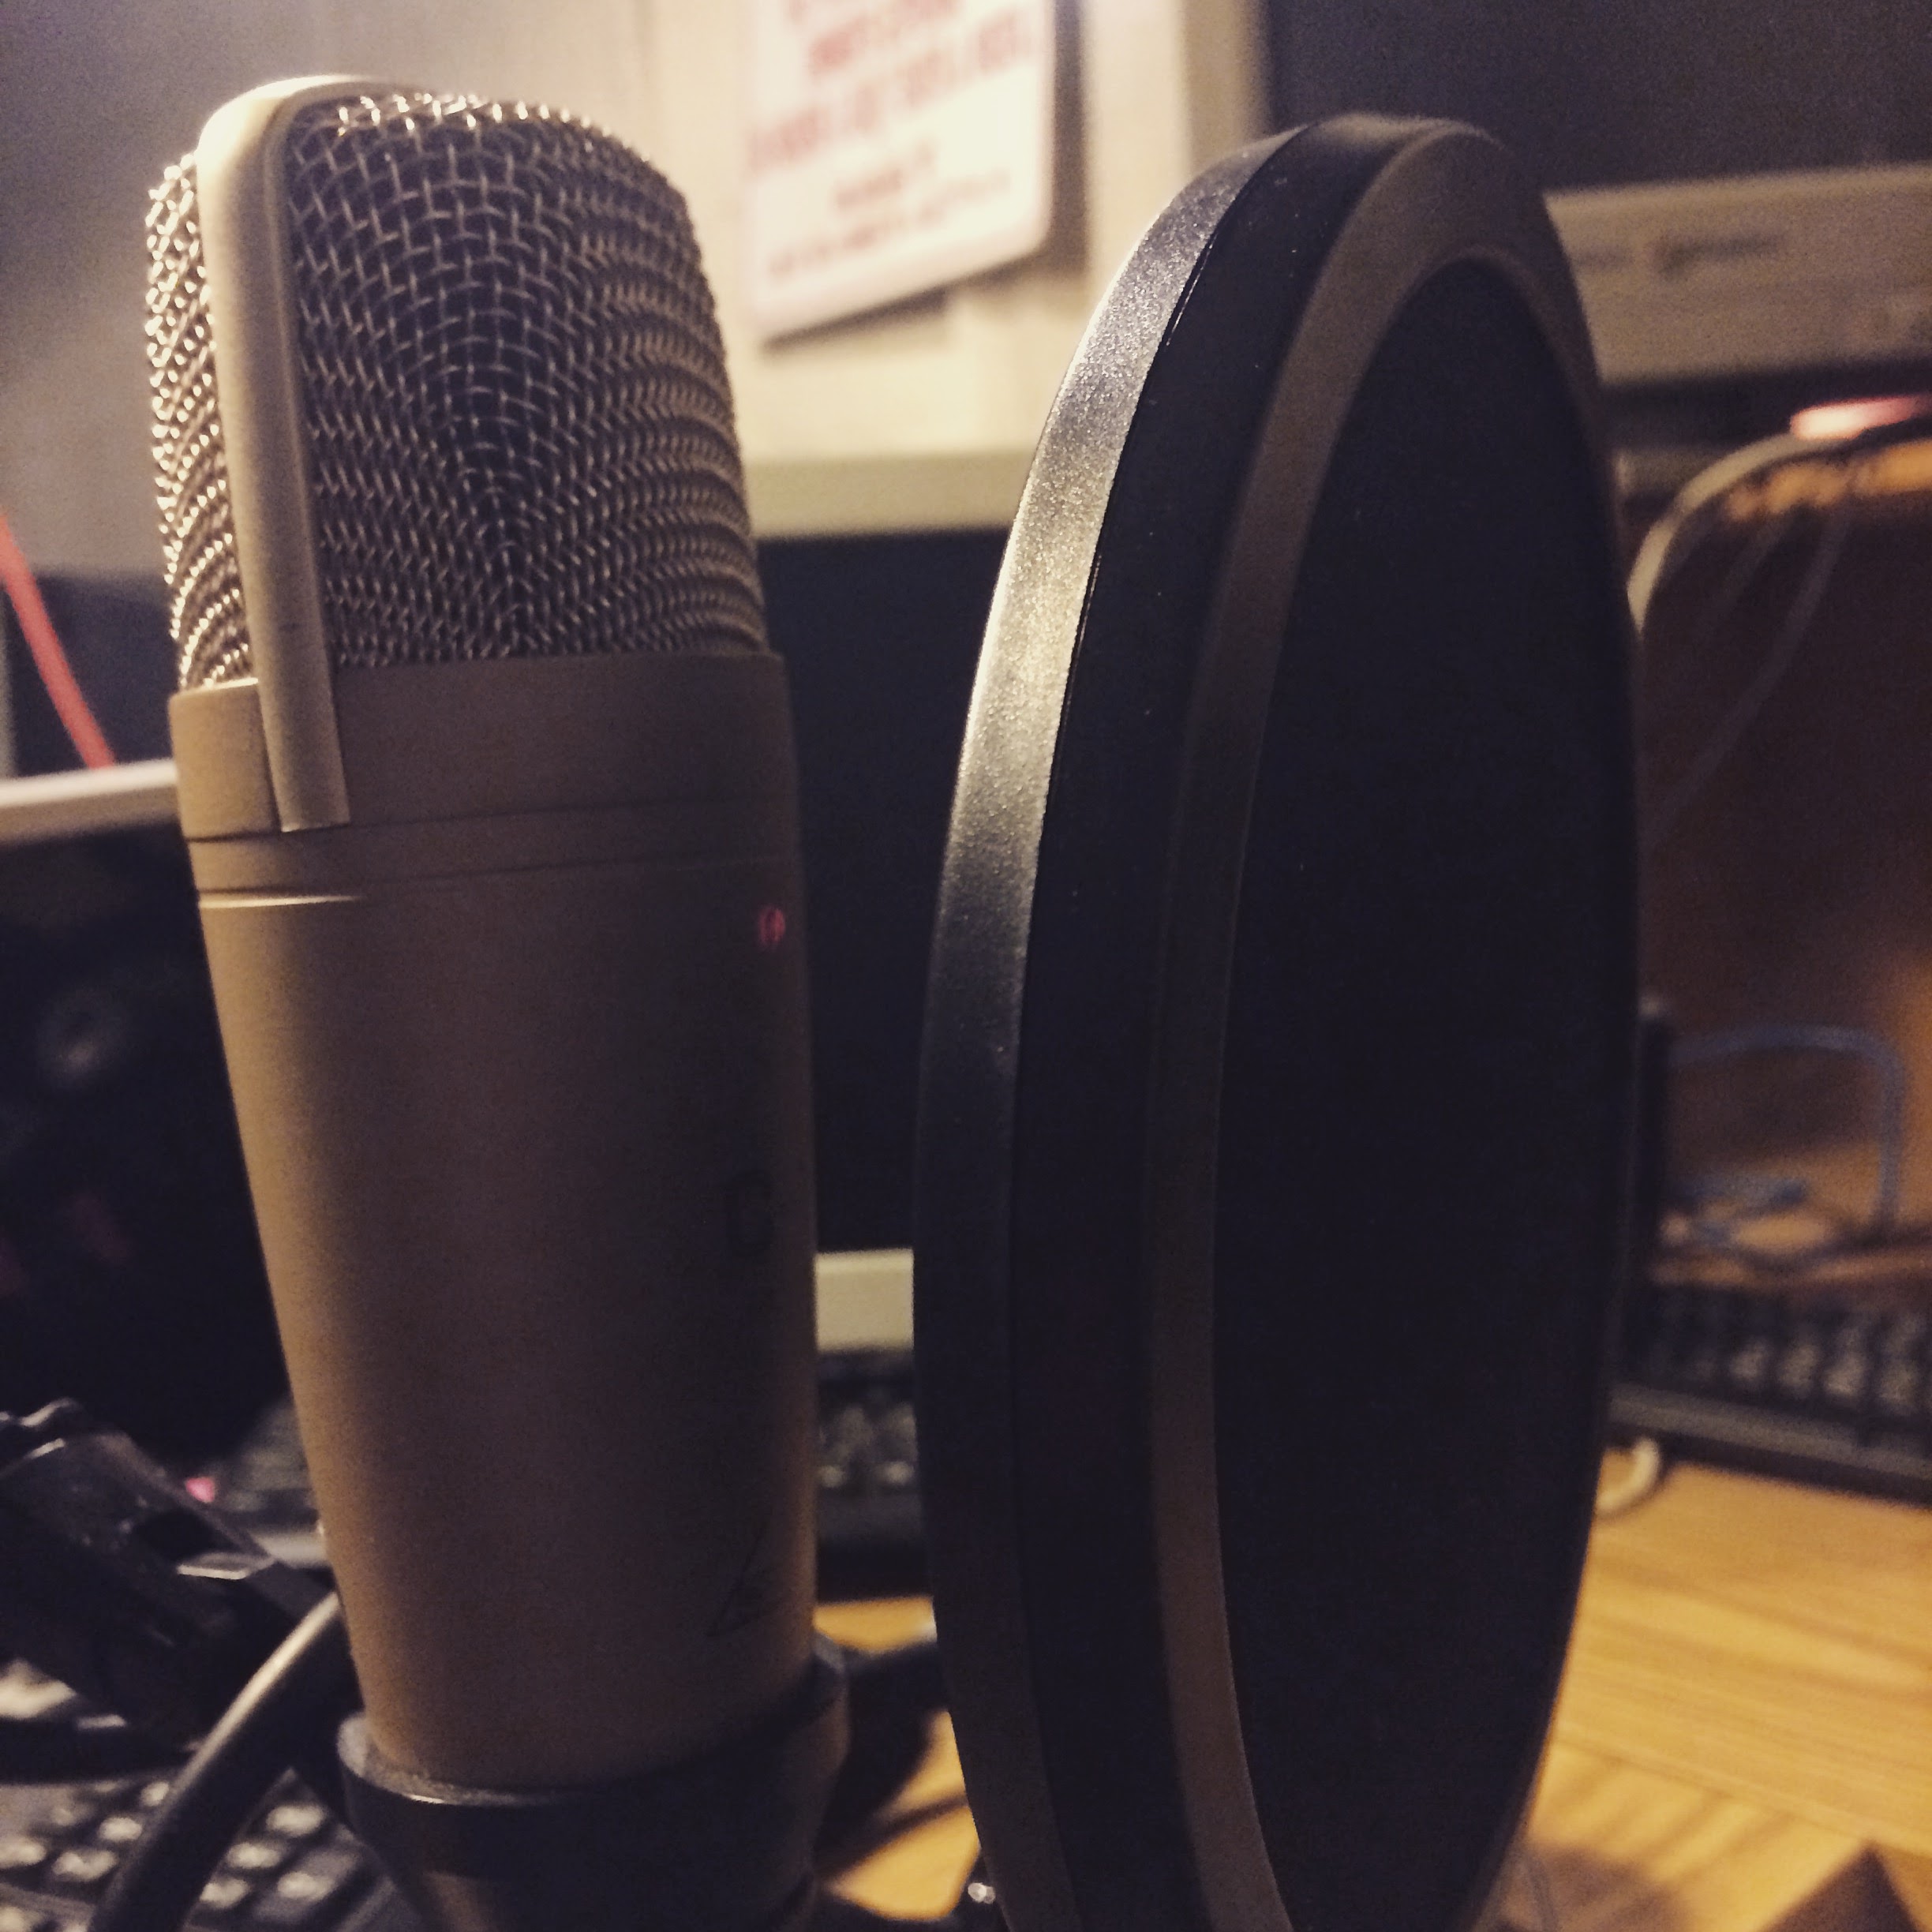 The 10 Episode Rule of Podcasting